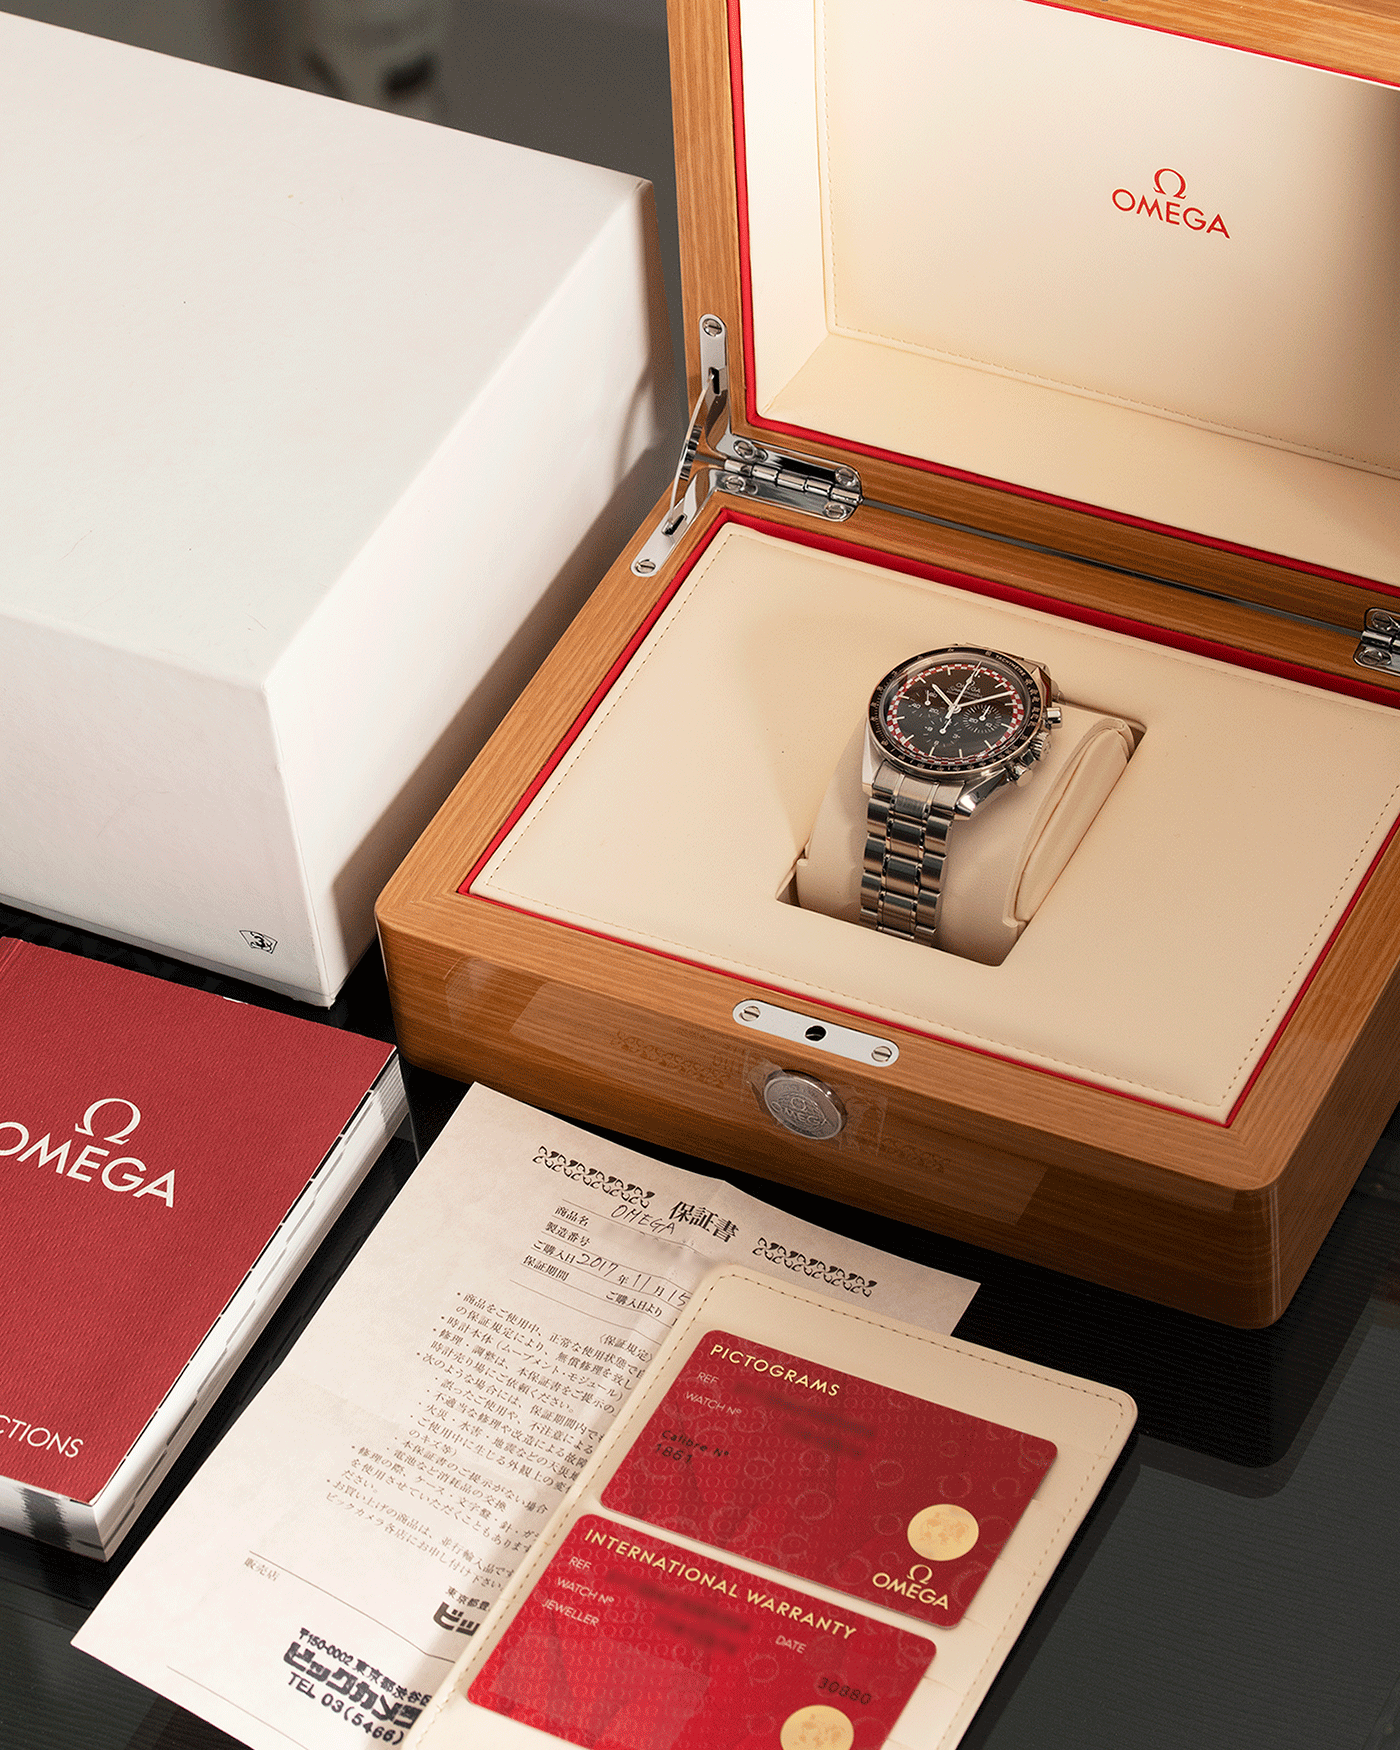 Brand: Omega Year: 2017 Model: Speedmaster Racing ‘Tin Tin’ Reference Number: 311.30.42.30.01.004 Material: Stainless Steel Movement: Omega in-house Cal. 1861 Case Diameter: 40mm Bracelet/Strap: Omega Speedmaster Bracelet